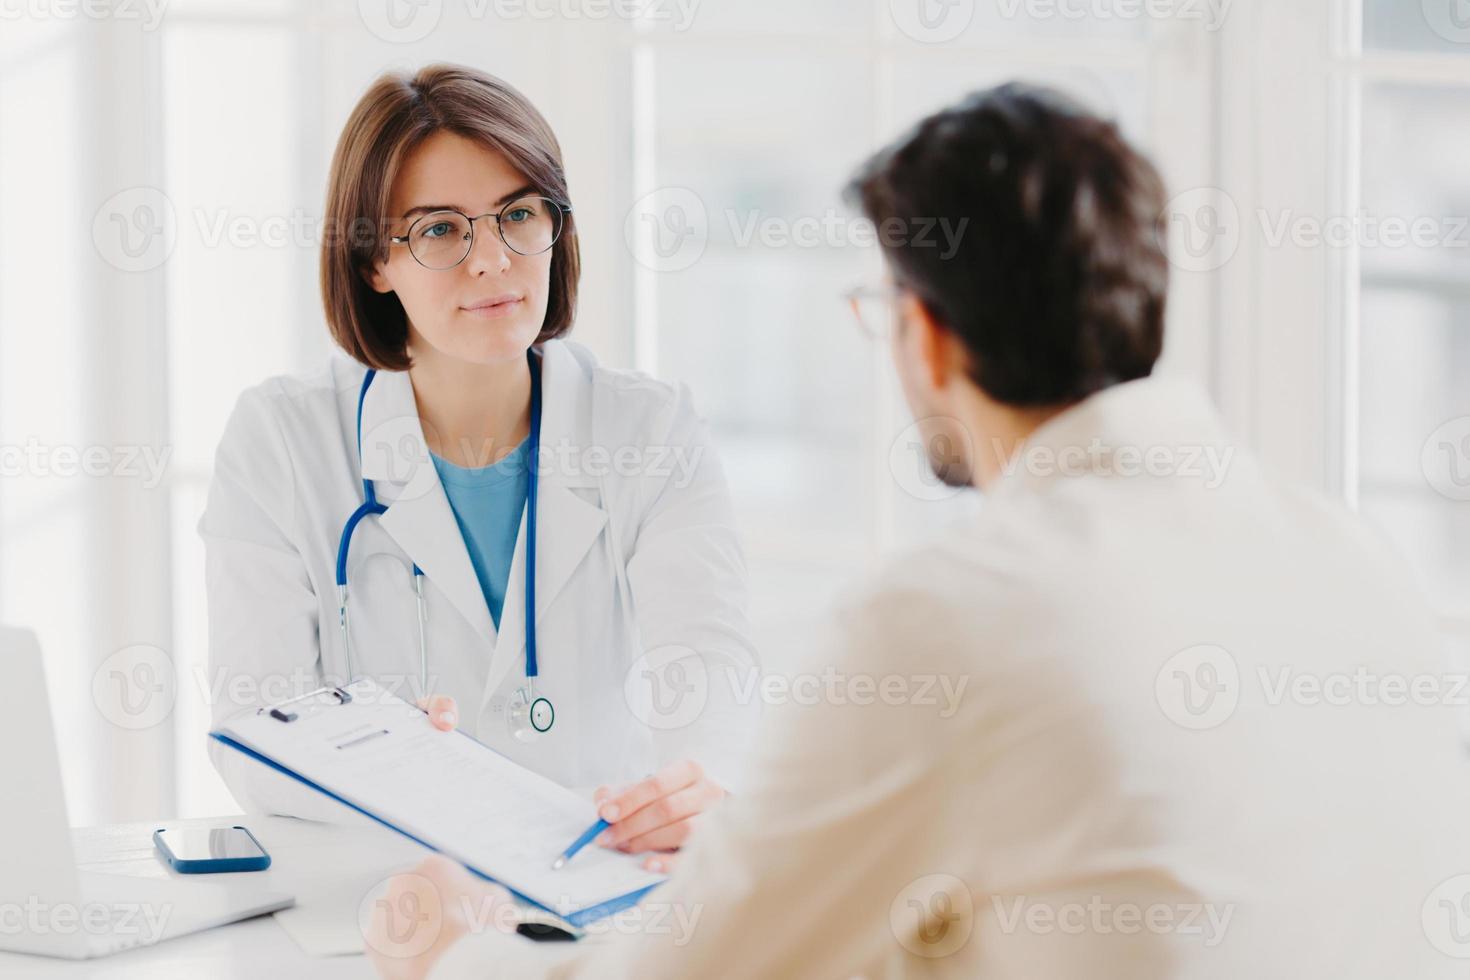 Female general practitioner explains which prescribed medicine patient should buy, gives medical visit consultation. Male clinic visitor tells about health complaints to therapist. Healthcare concept photo